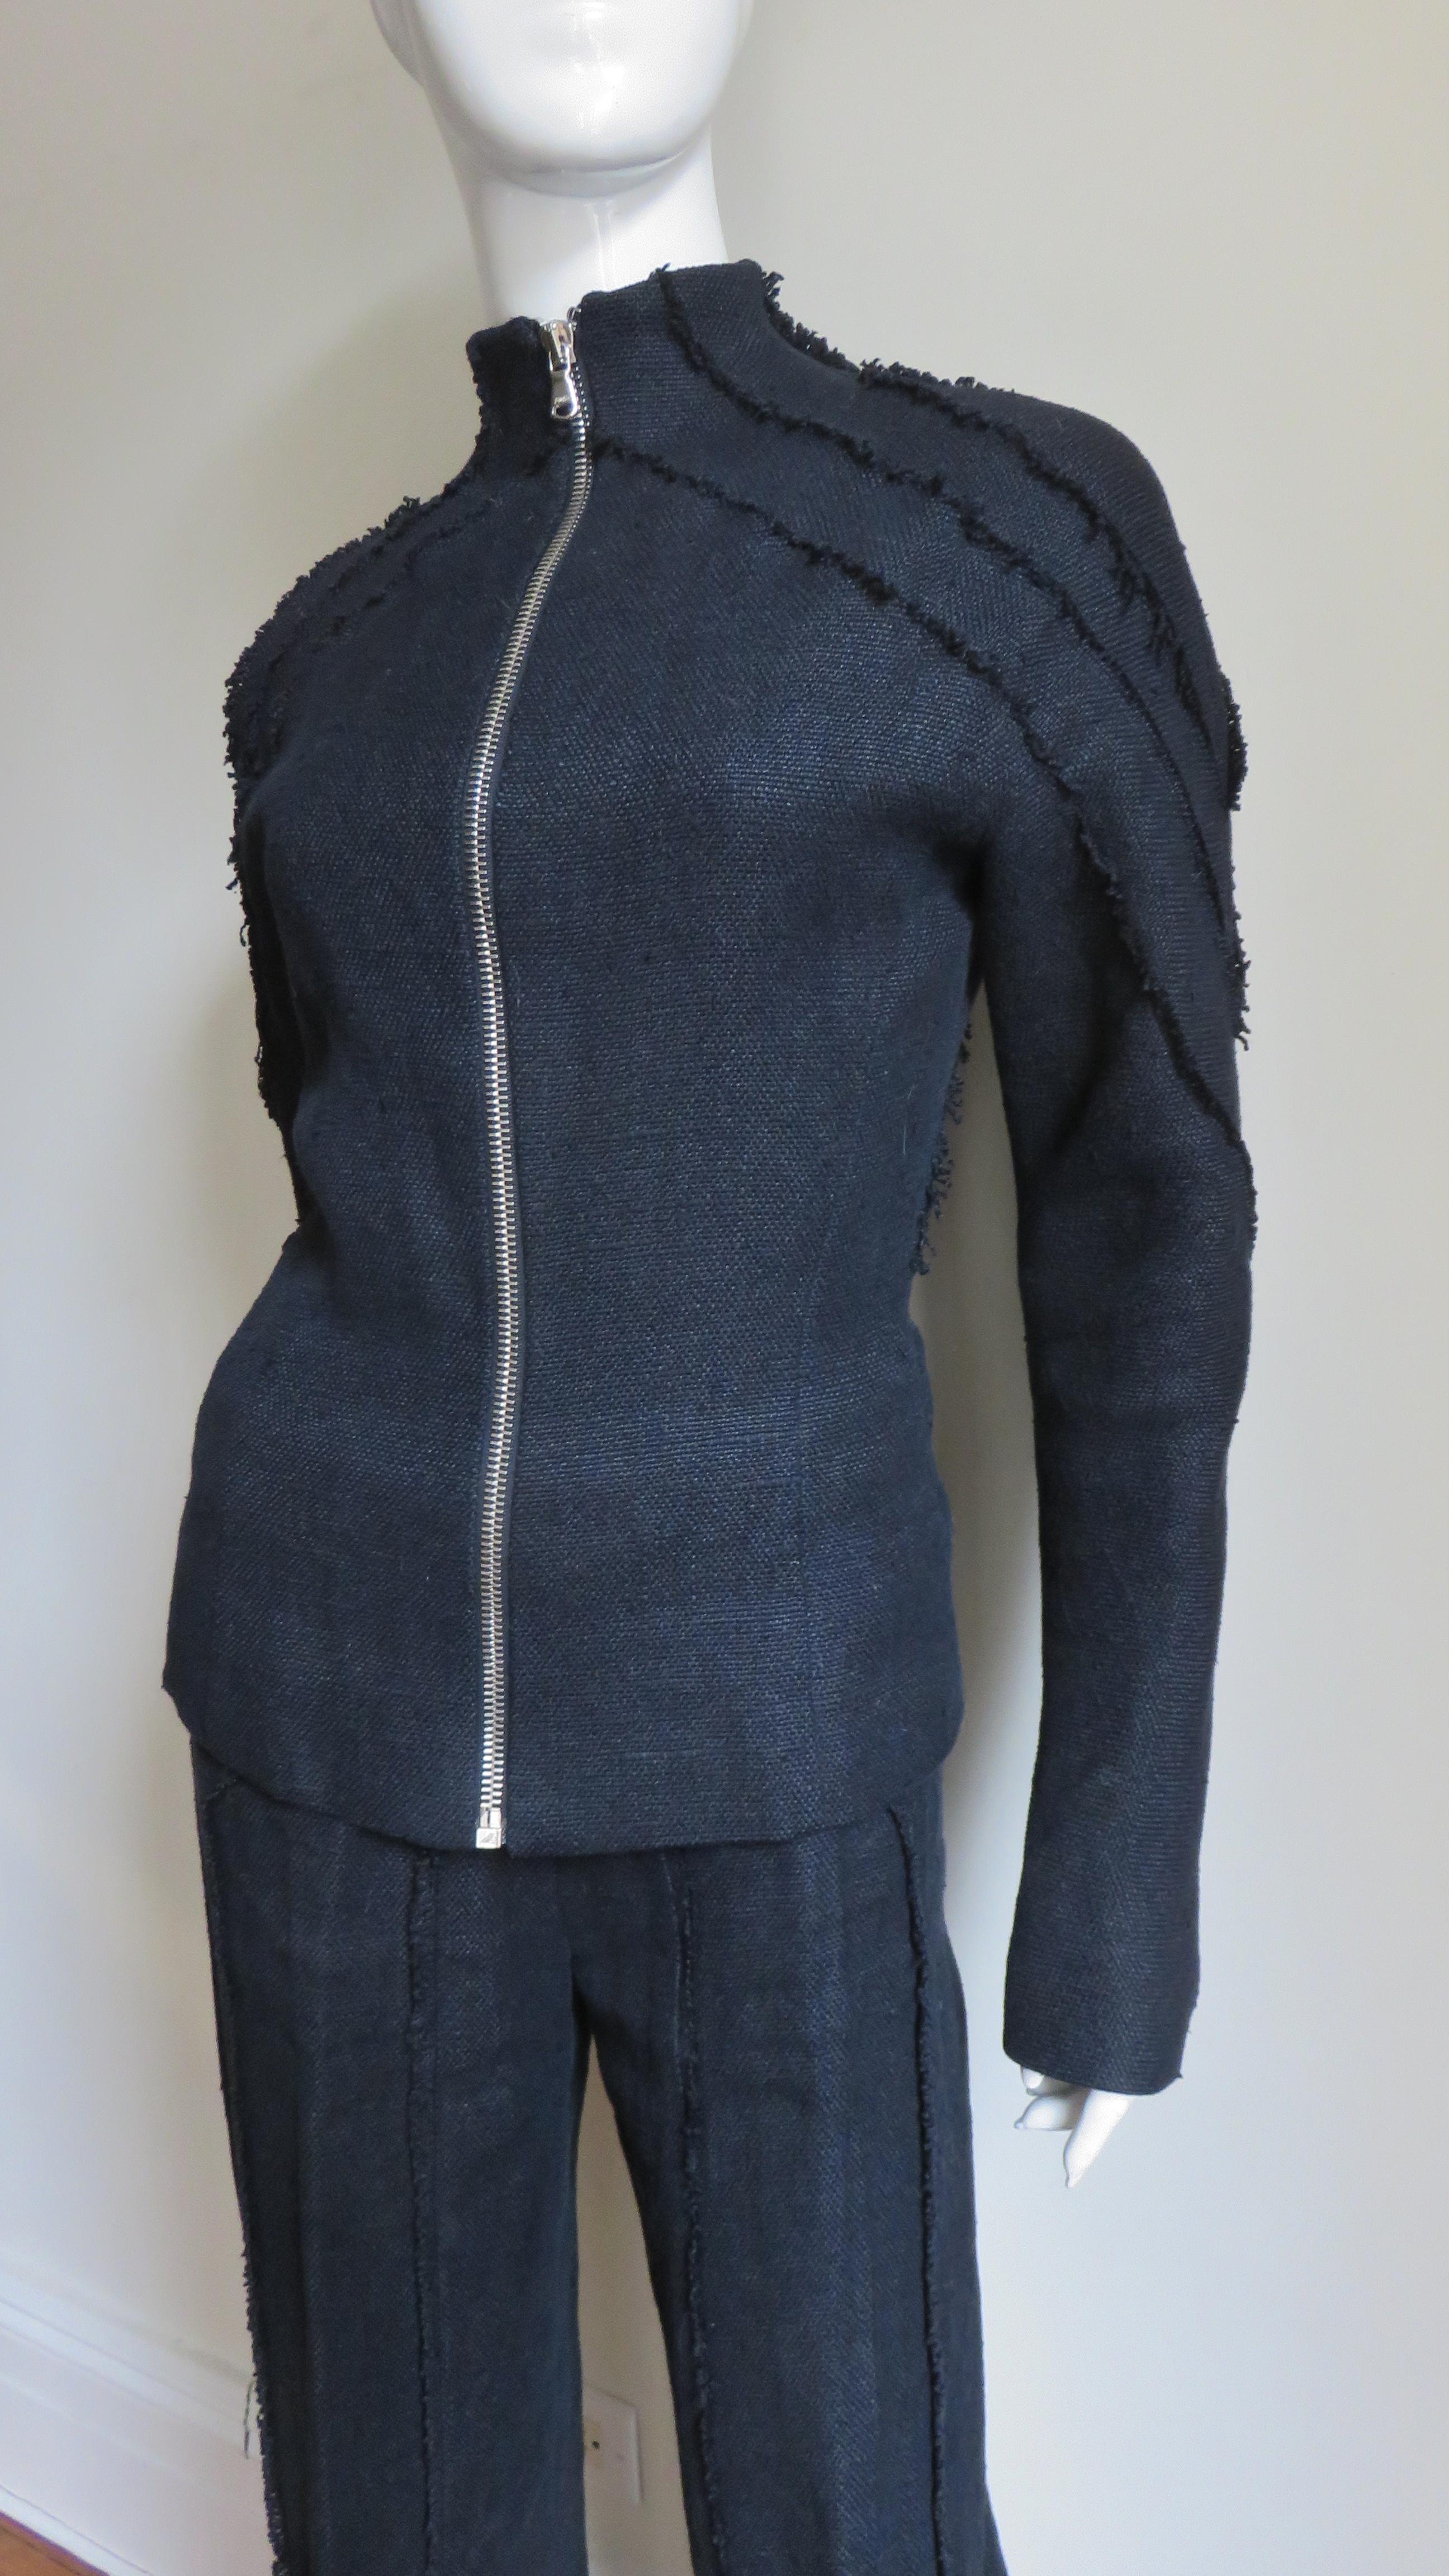 Alexander McQueen New Elaborately Seamed Jacket and Pants A/W 1999 For Sale 1